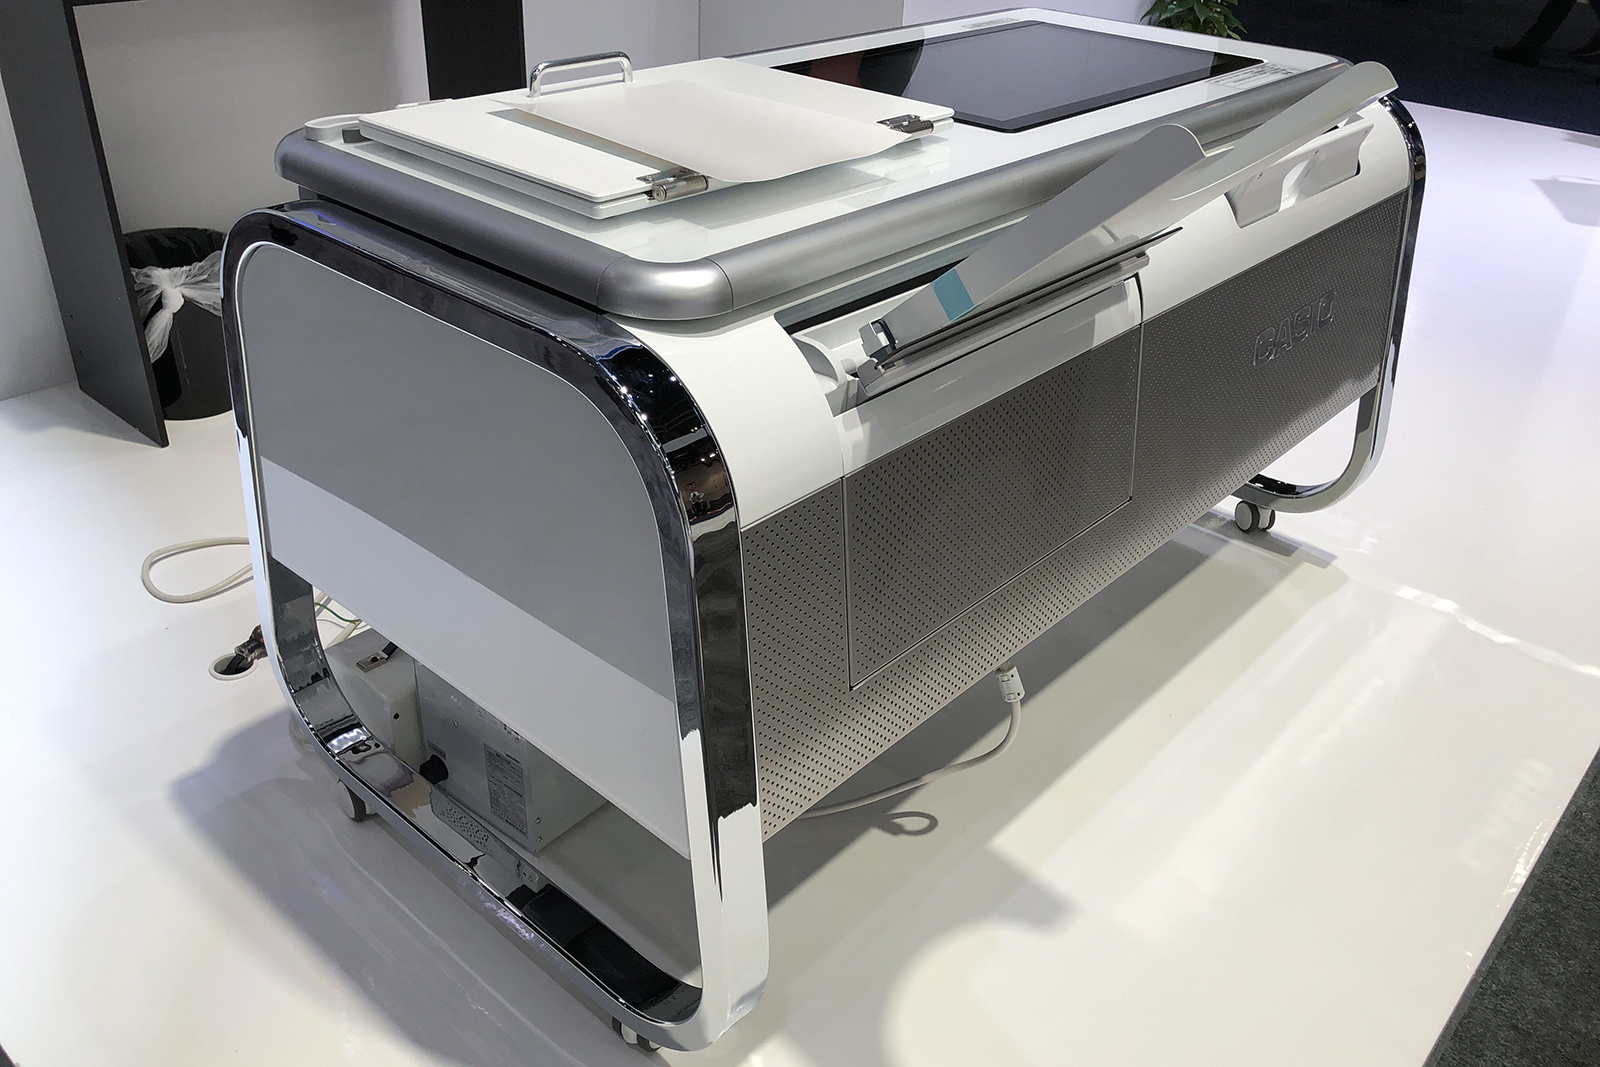 casio mofrel 25d printer ces2018 image uploaded from ios 11